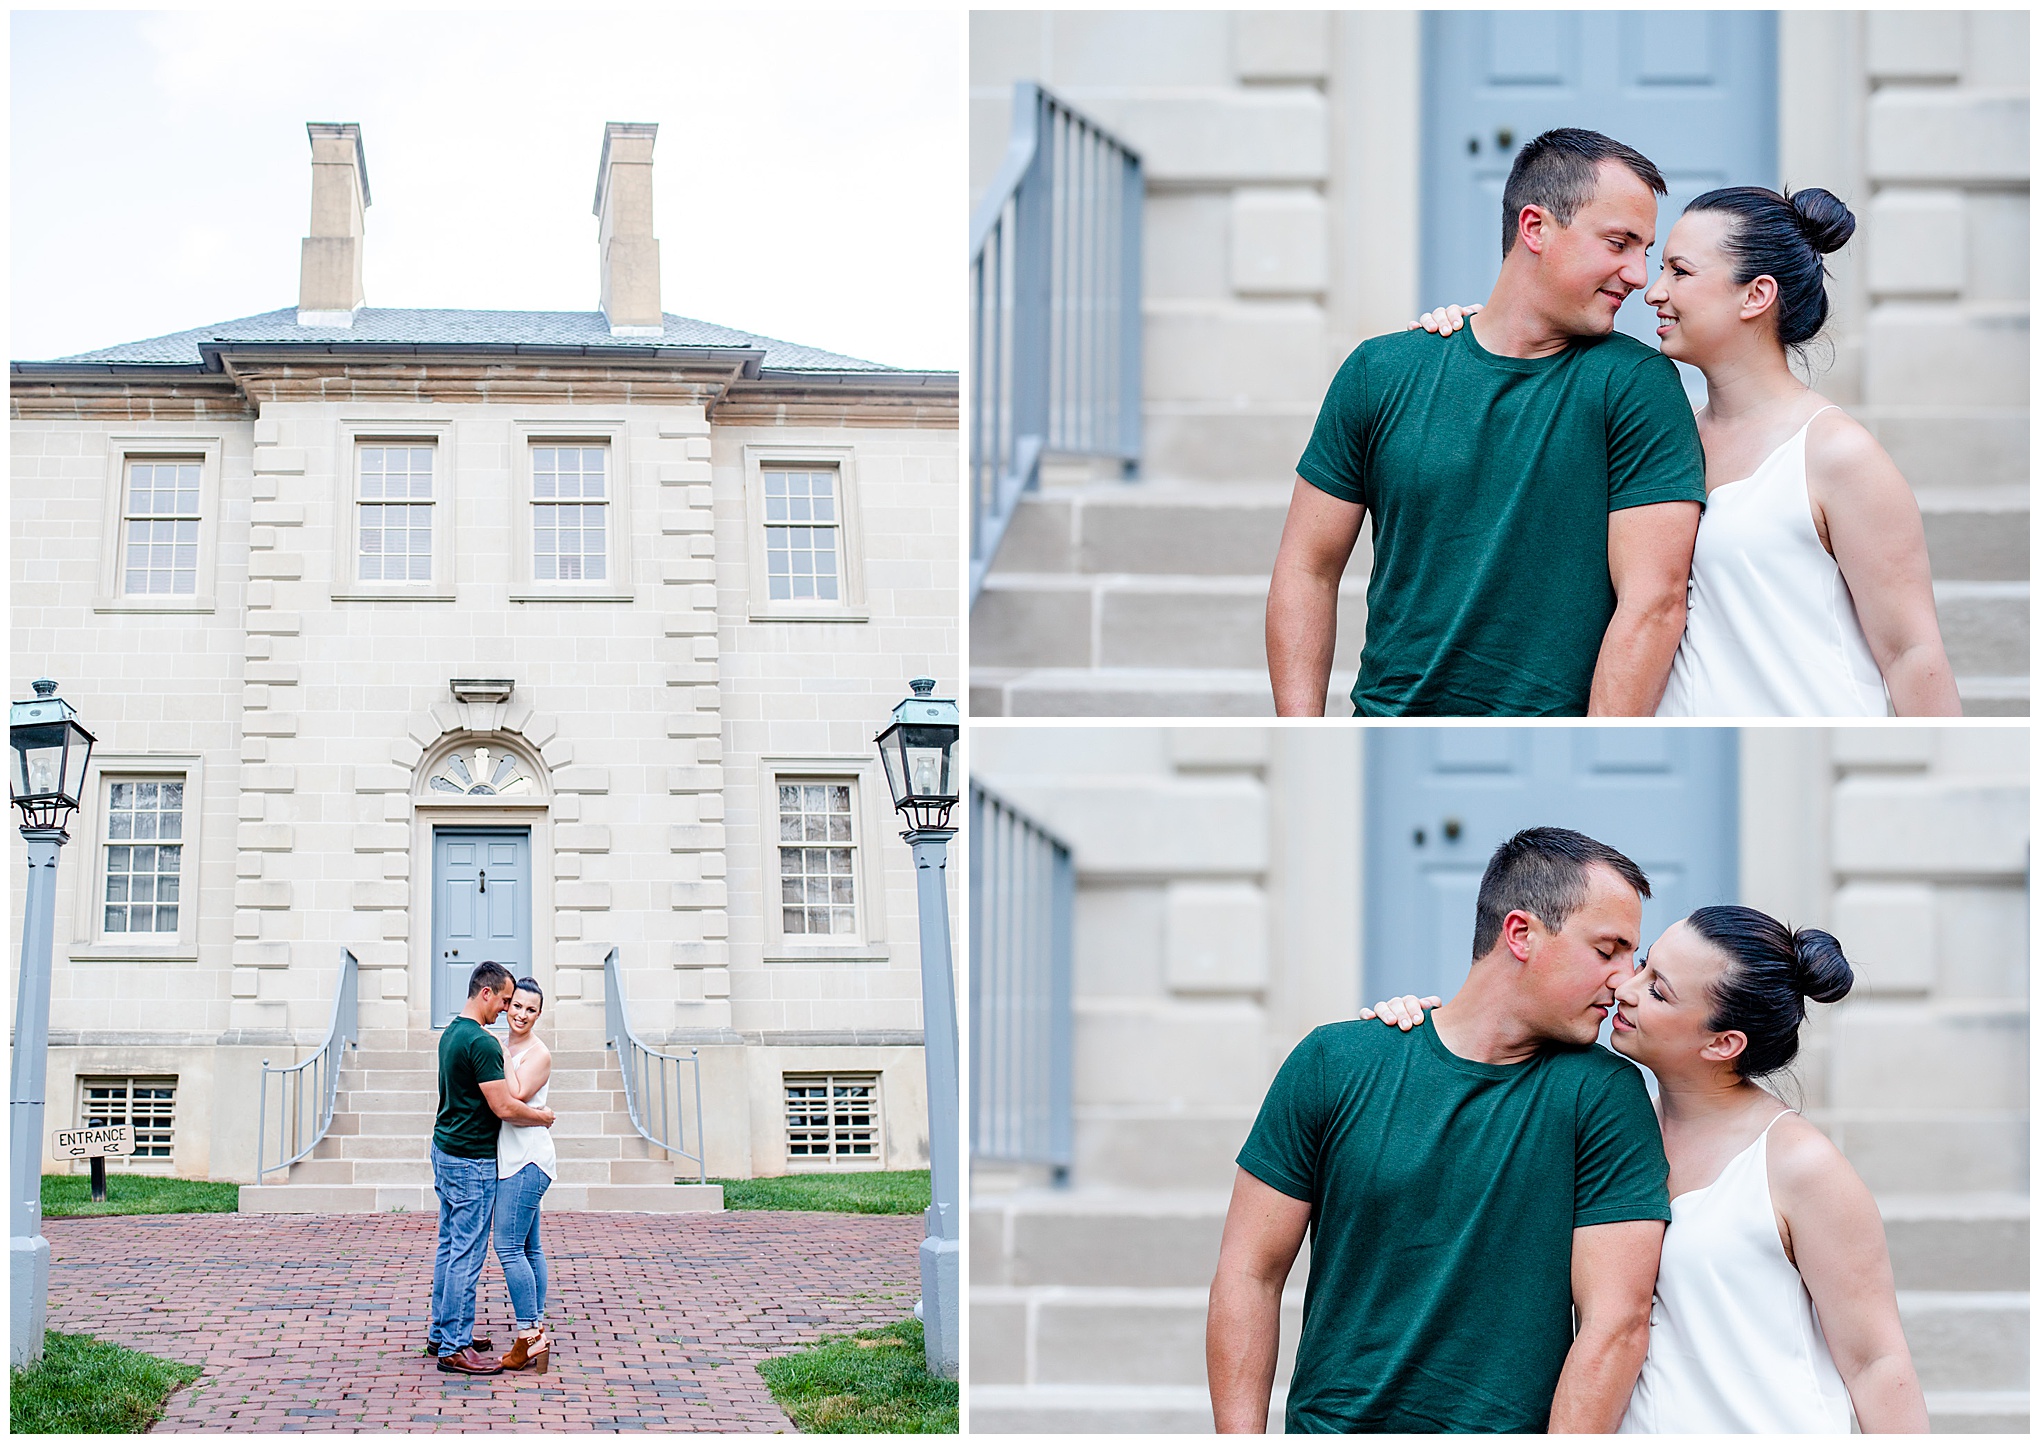 Carlyle House engagement photos, Carlyle House, Alexandria engagement photos, Old Town Alexandria engagement photos, Old Town Alexandria, Alexandria engagement photos, Alexandria Virginia, classic engagement photos, historic homes engagement photos, casual engagement photos, Rachel E.H. Photography, couple goals, romantic portraits, couple almost kissing